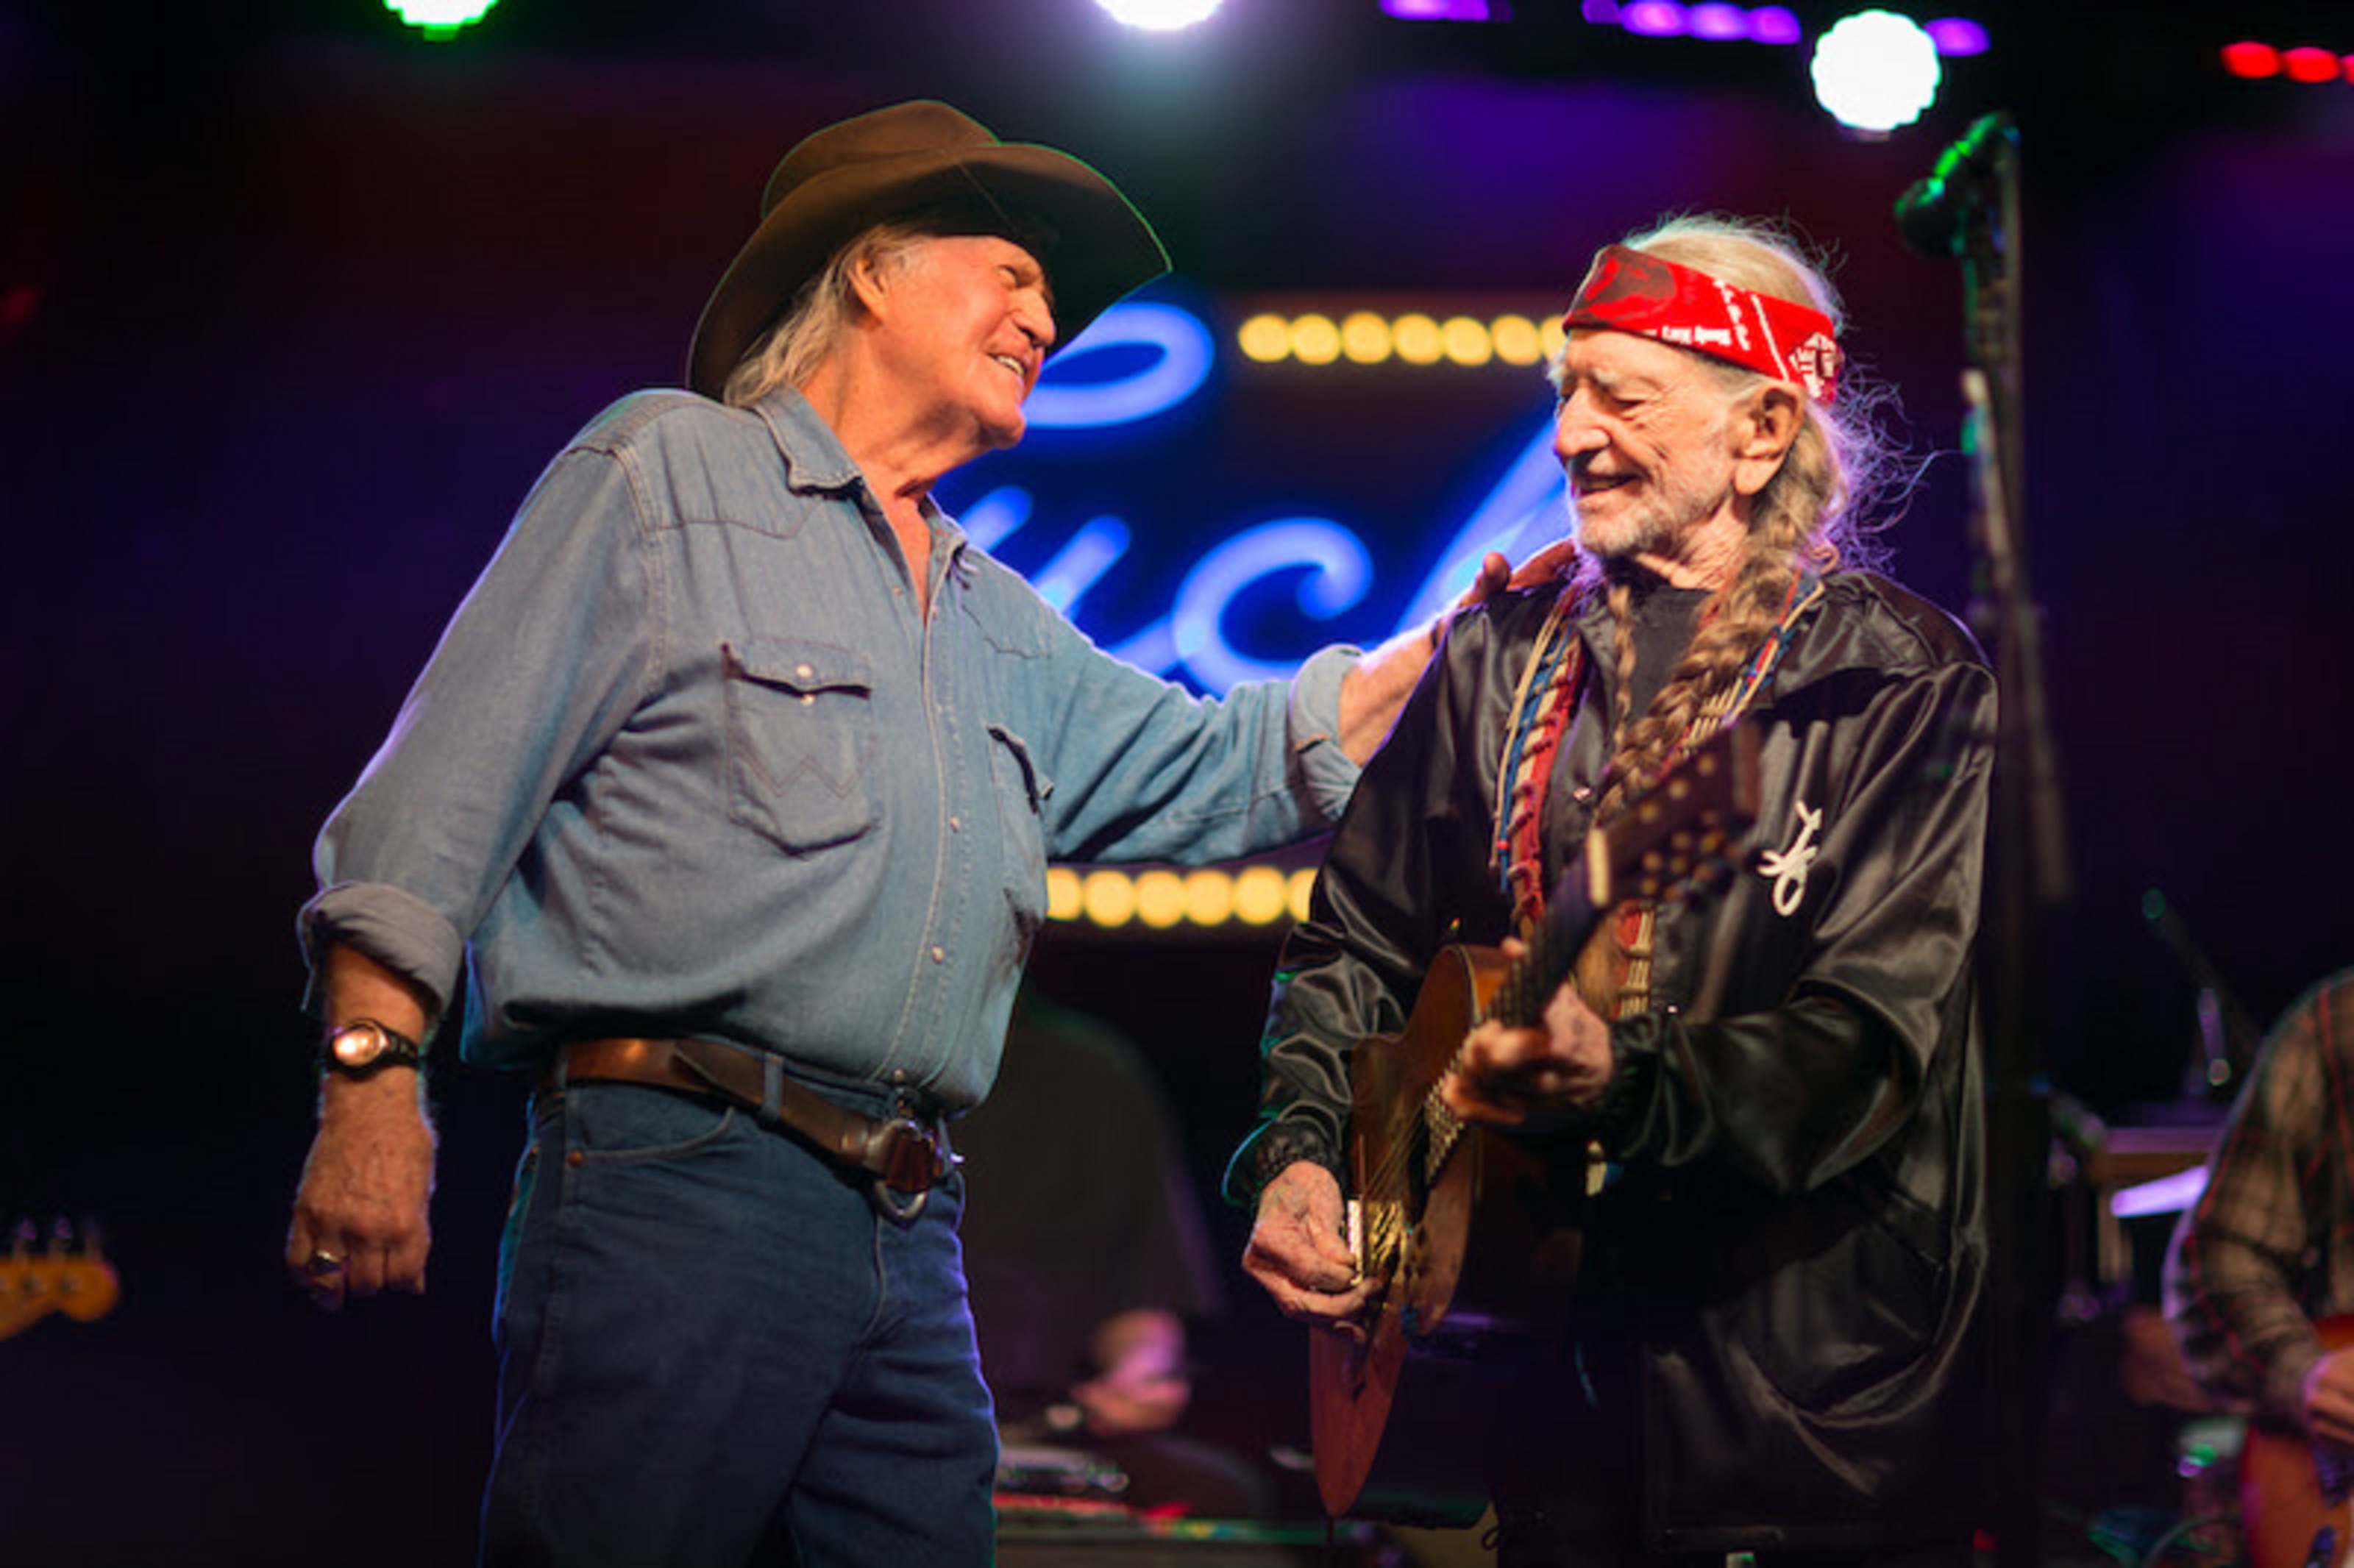 Willie Nelson Wins "Best Country Solo Performance" for "Live Forever